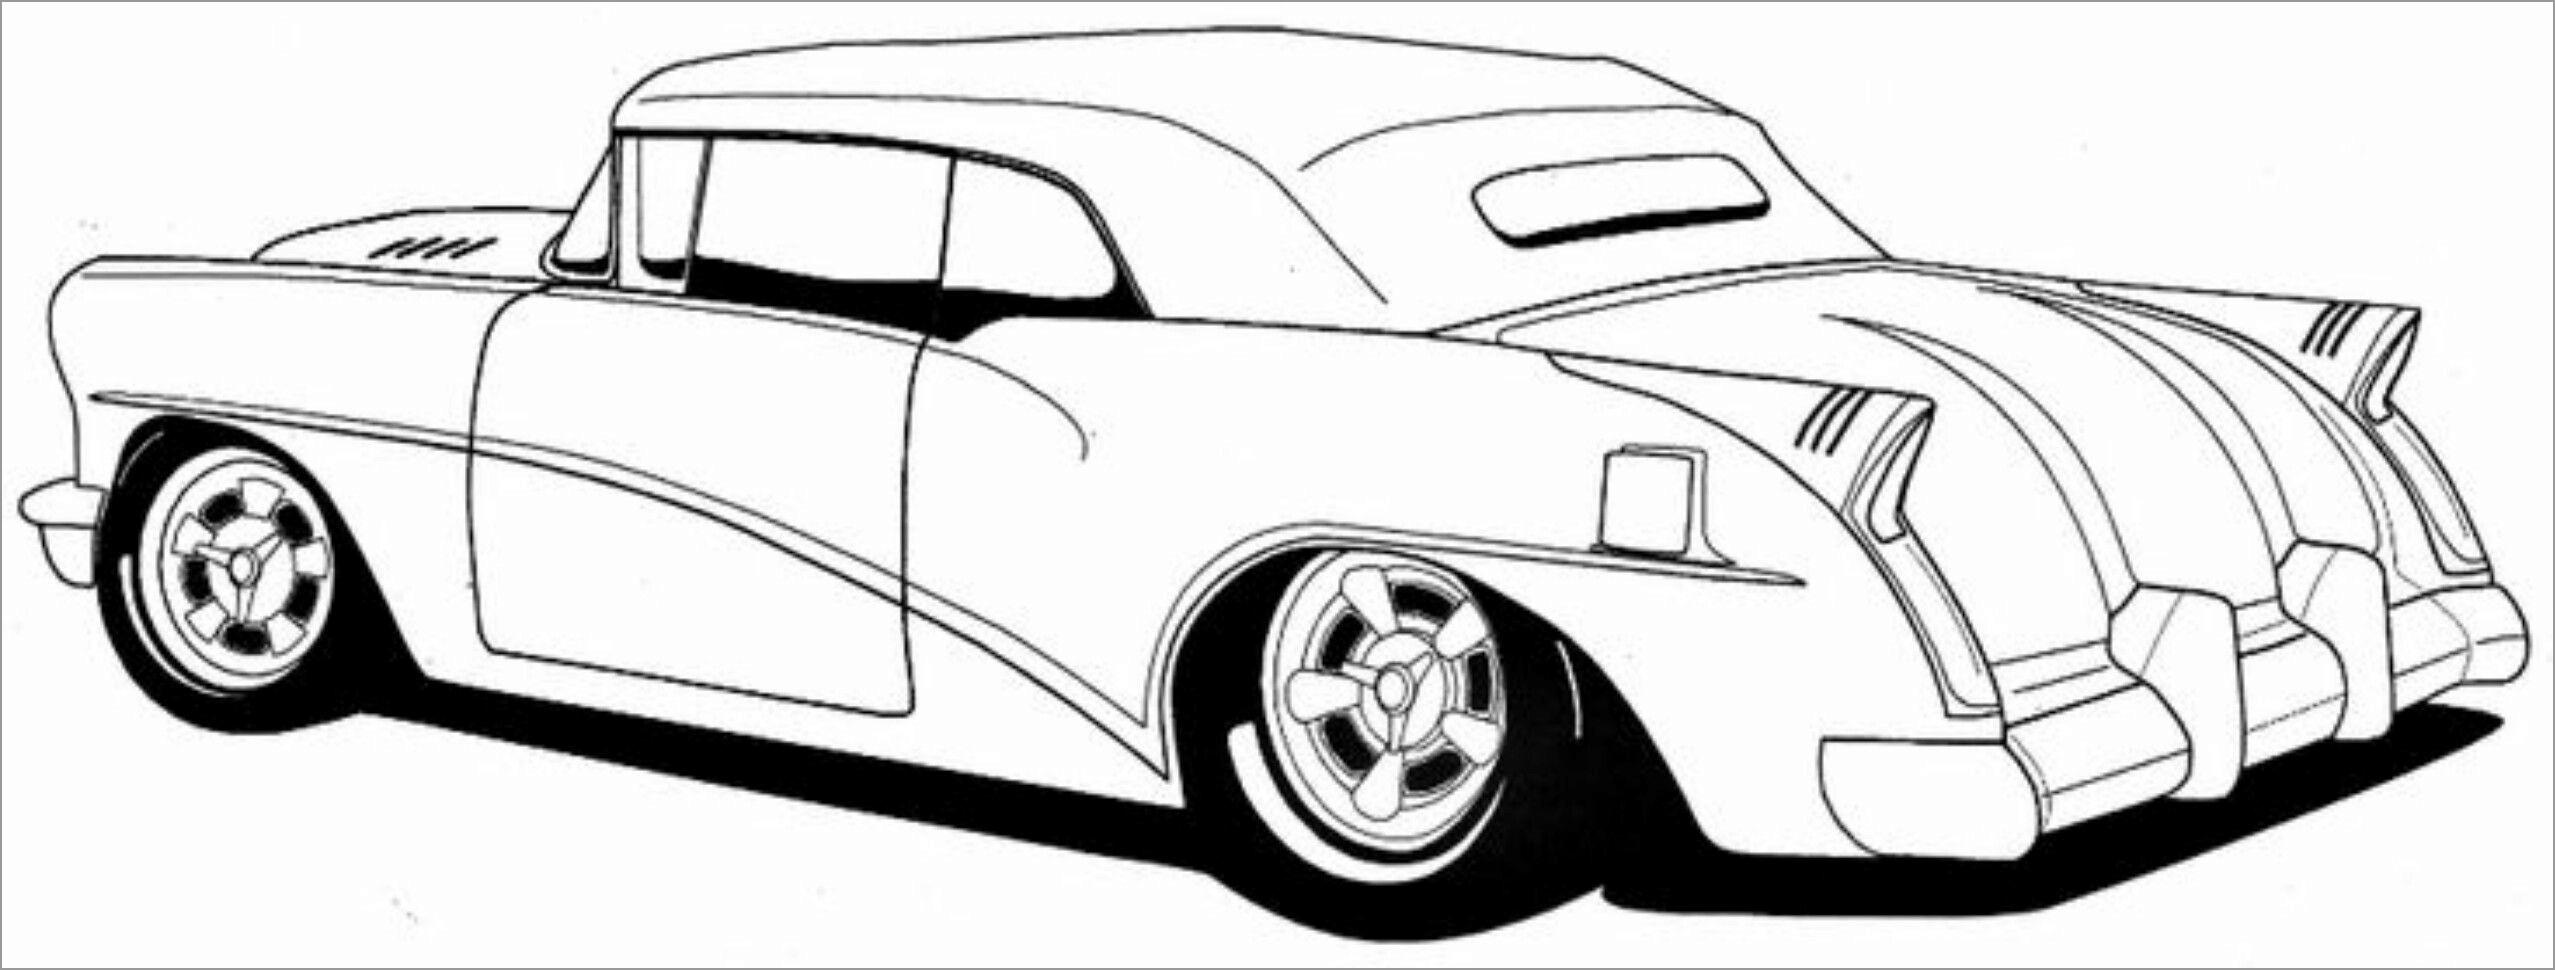 Classic Muscle Car Coloring Pages - boringpop.com